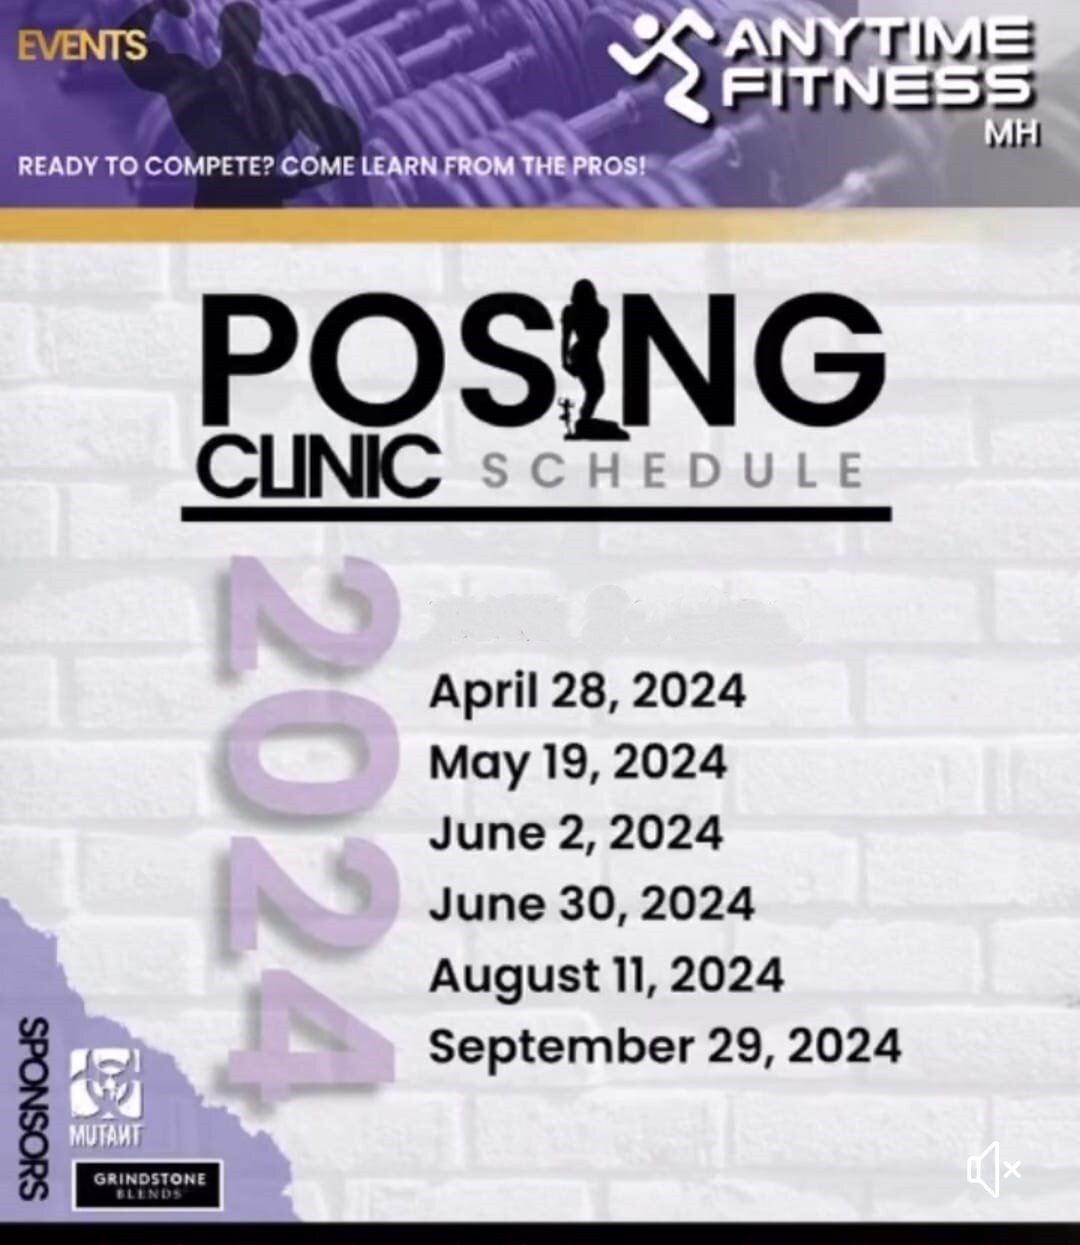 The secret to making progress is to get started. -Mark Twain

So, let's get started.......The next posing clinic is scheduled for Sunday, April 28th, 12pm. See you there.